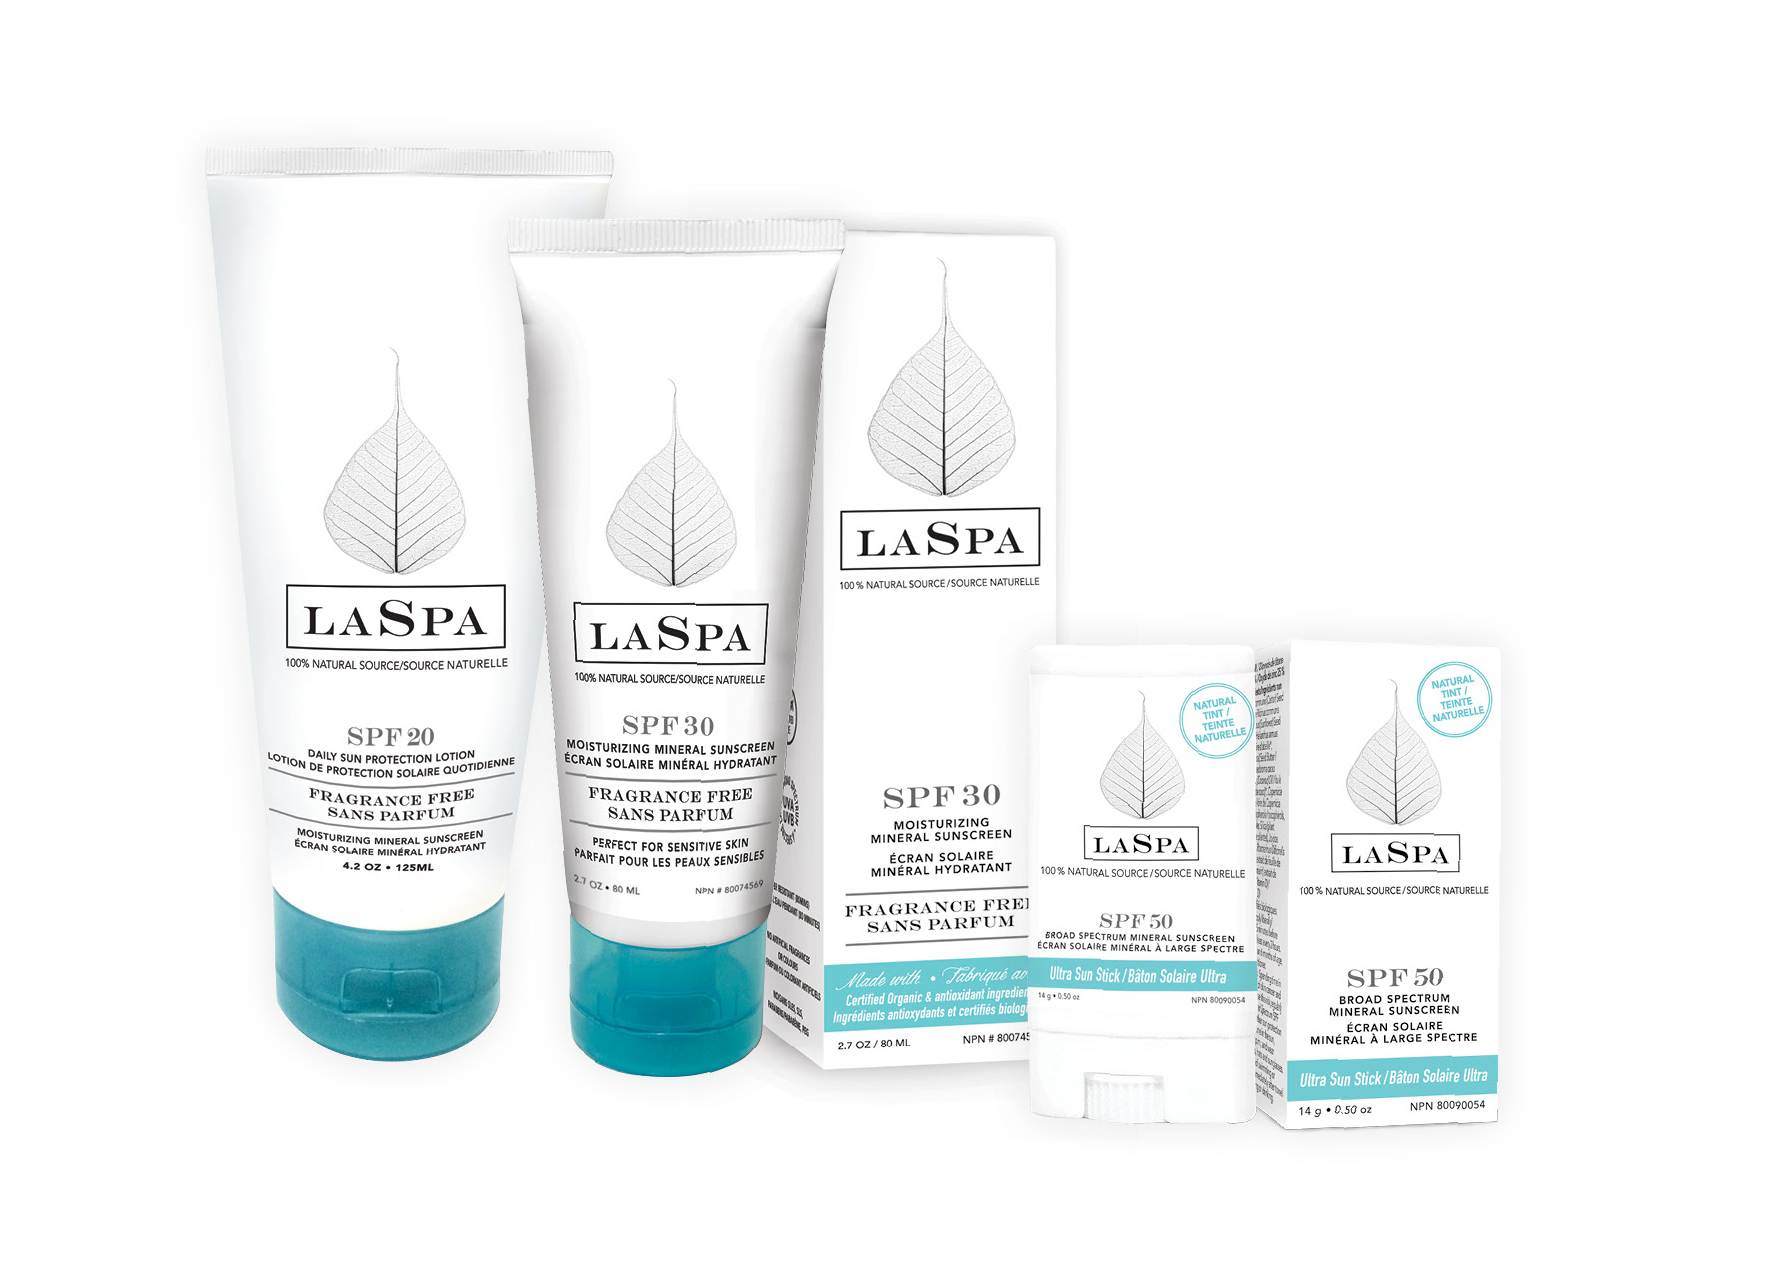 LASPA signature white bottles family collection.